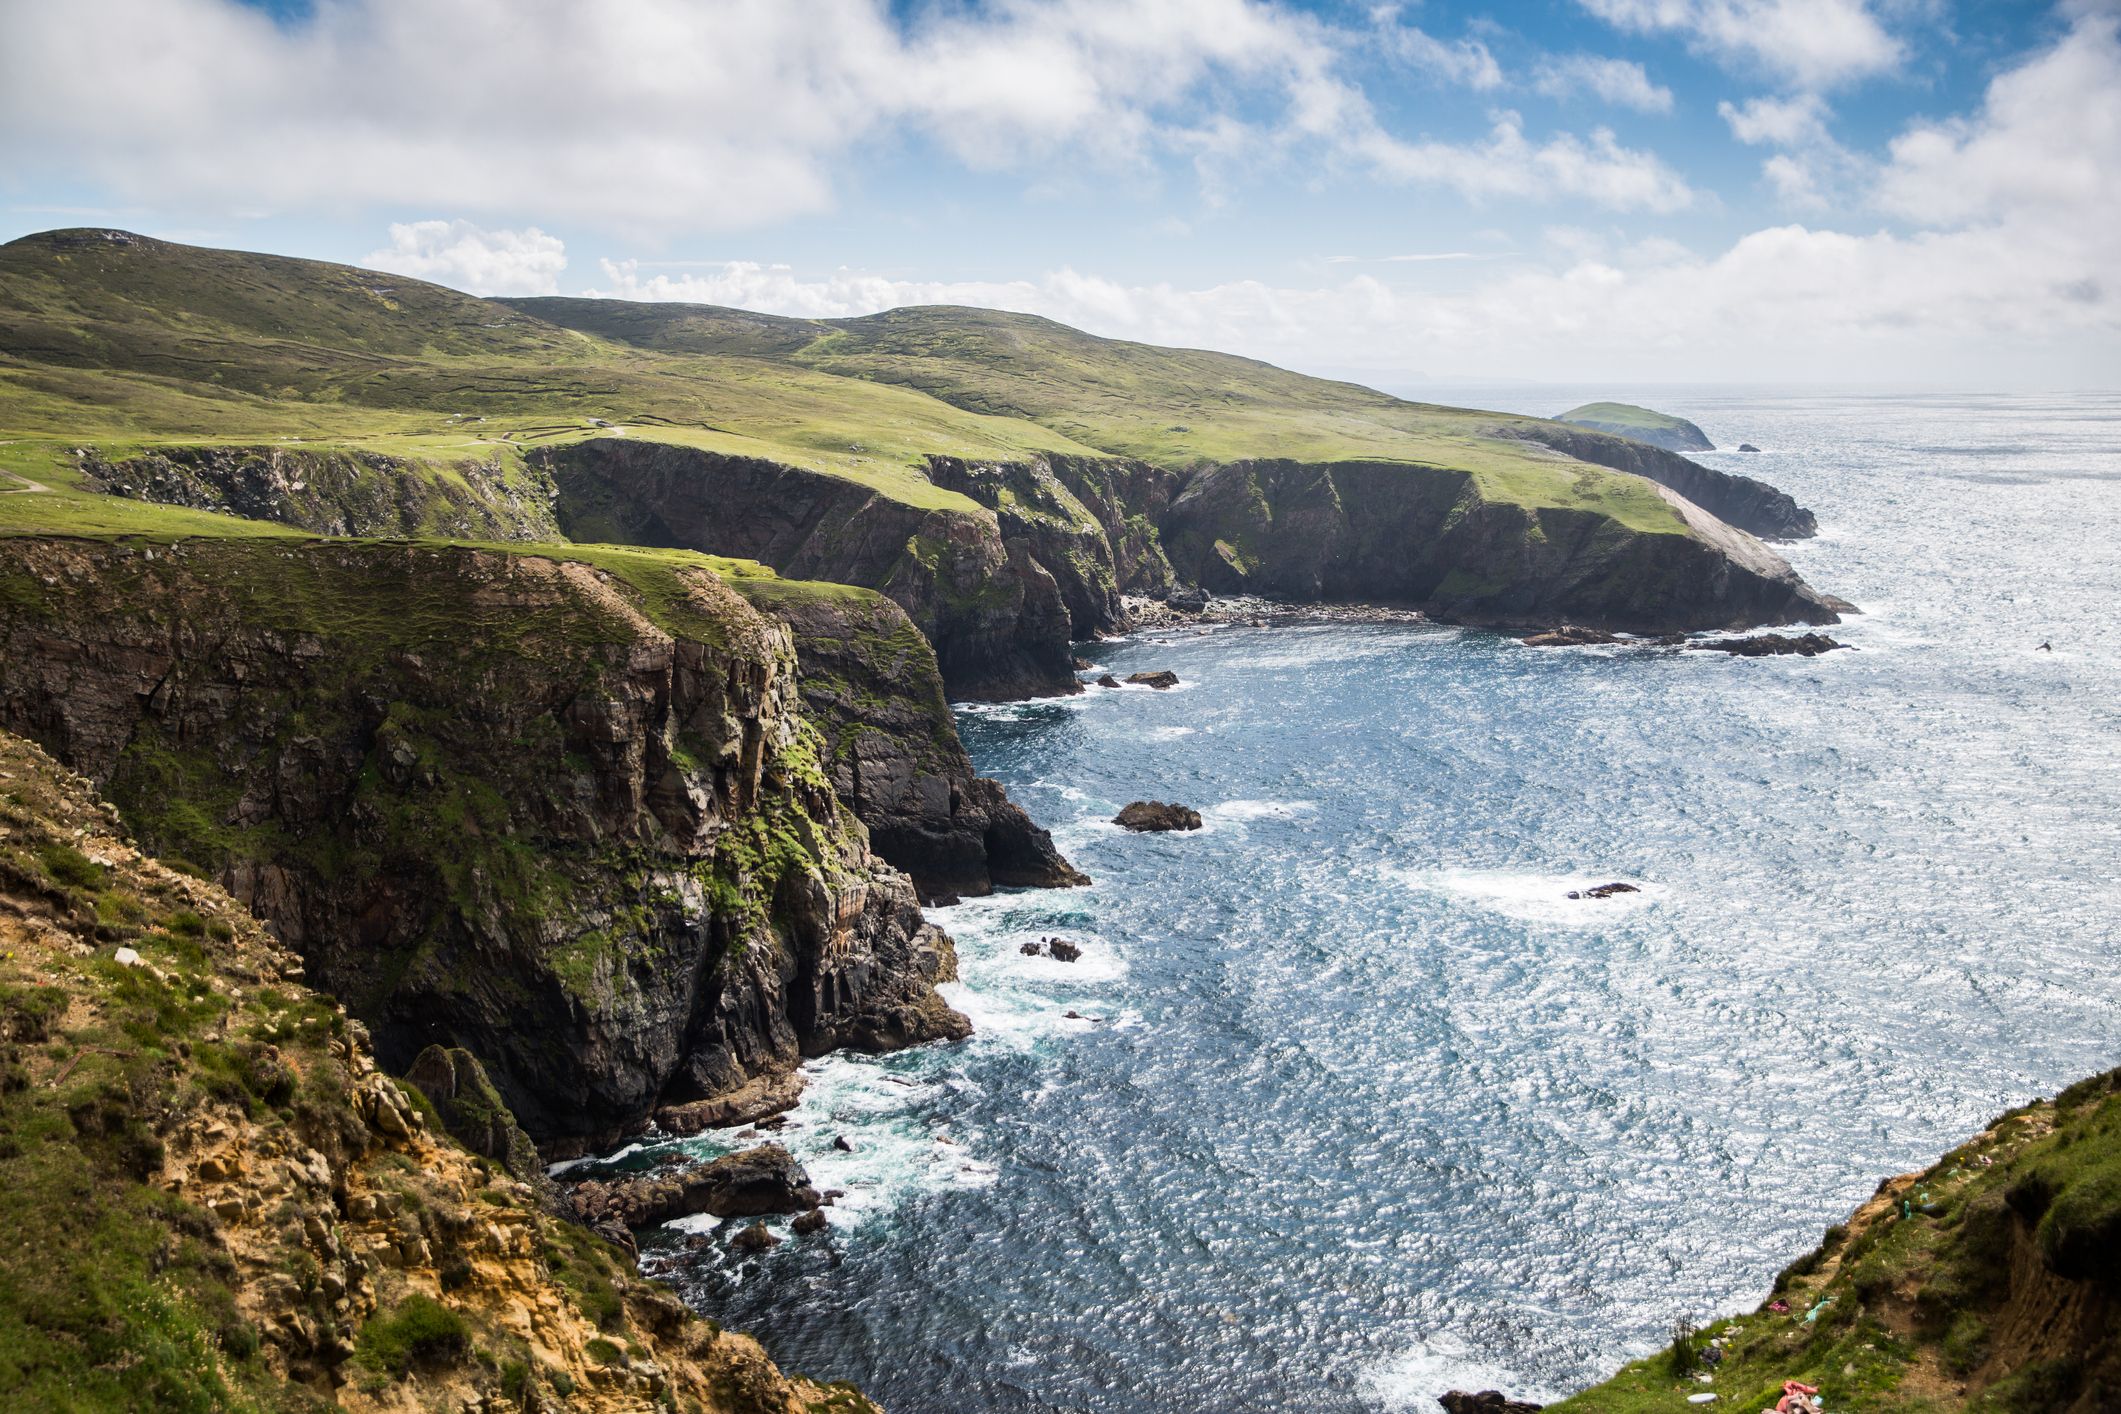 Get Up To £68,000 If You Move To An Idyllic Remote Island In Ireland